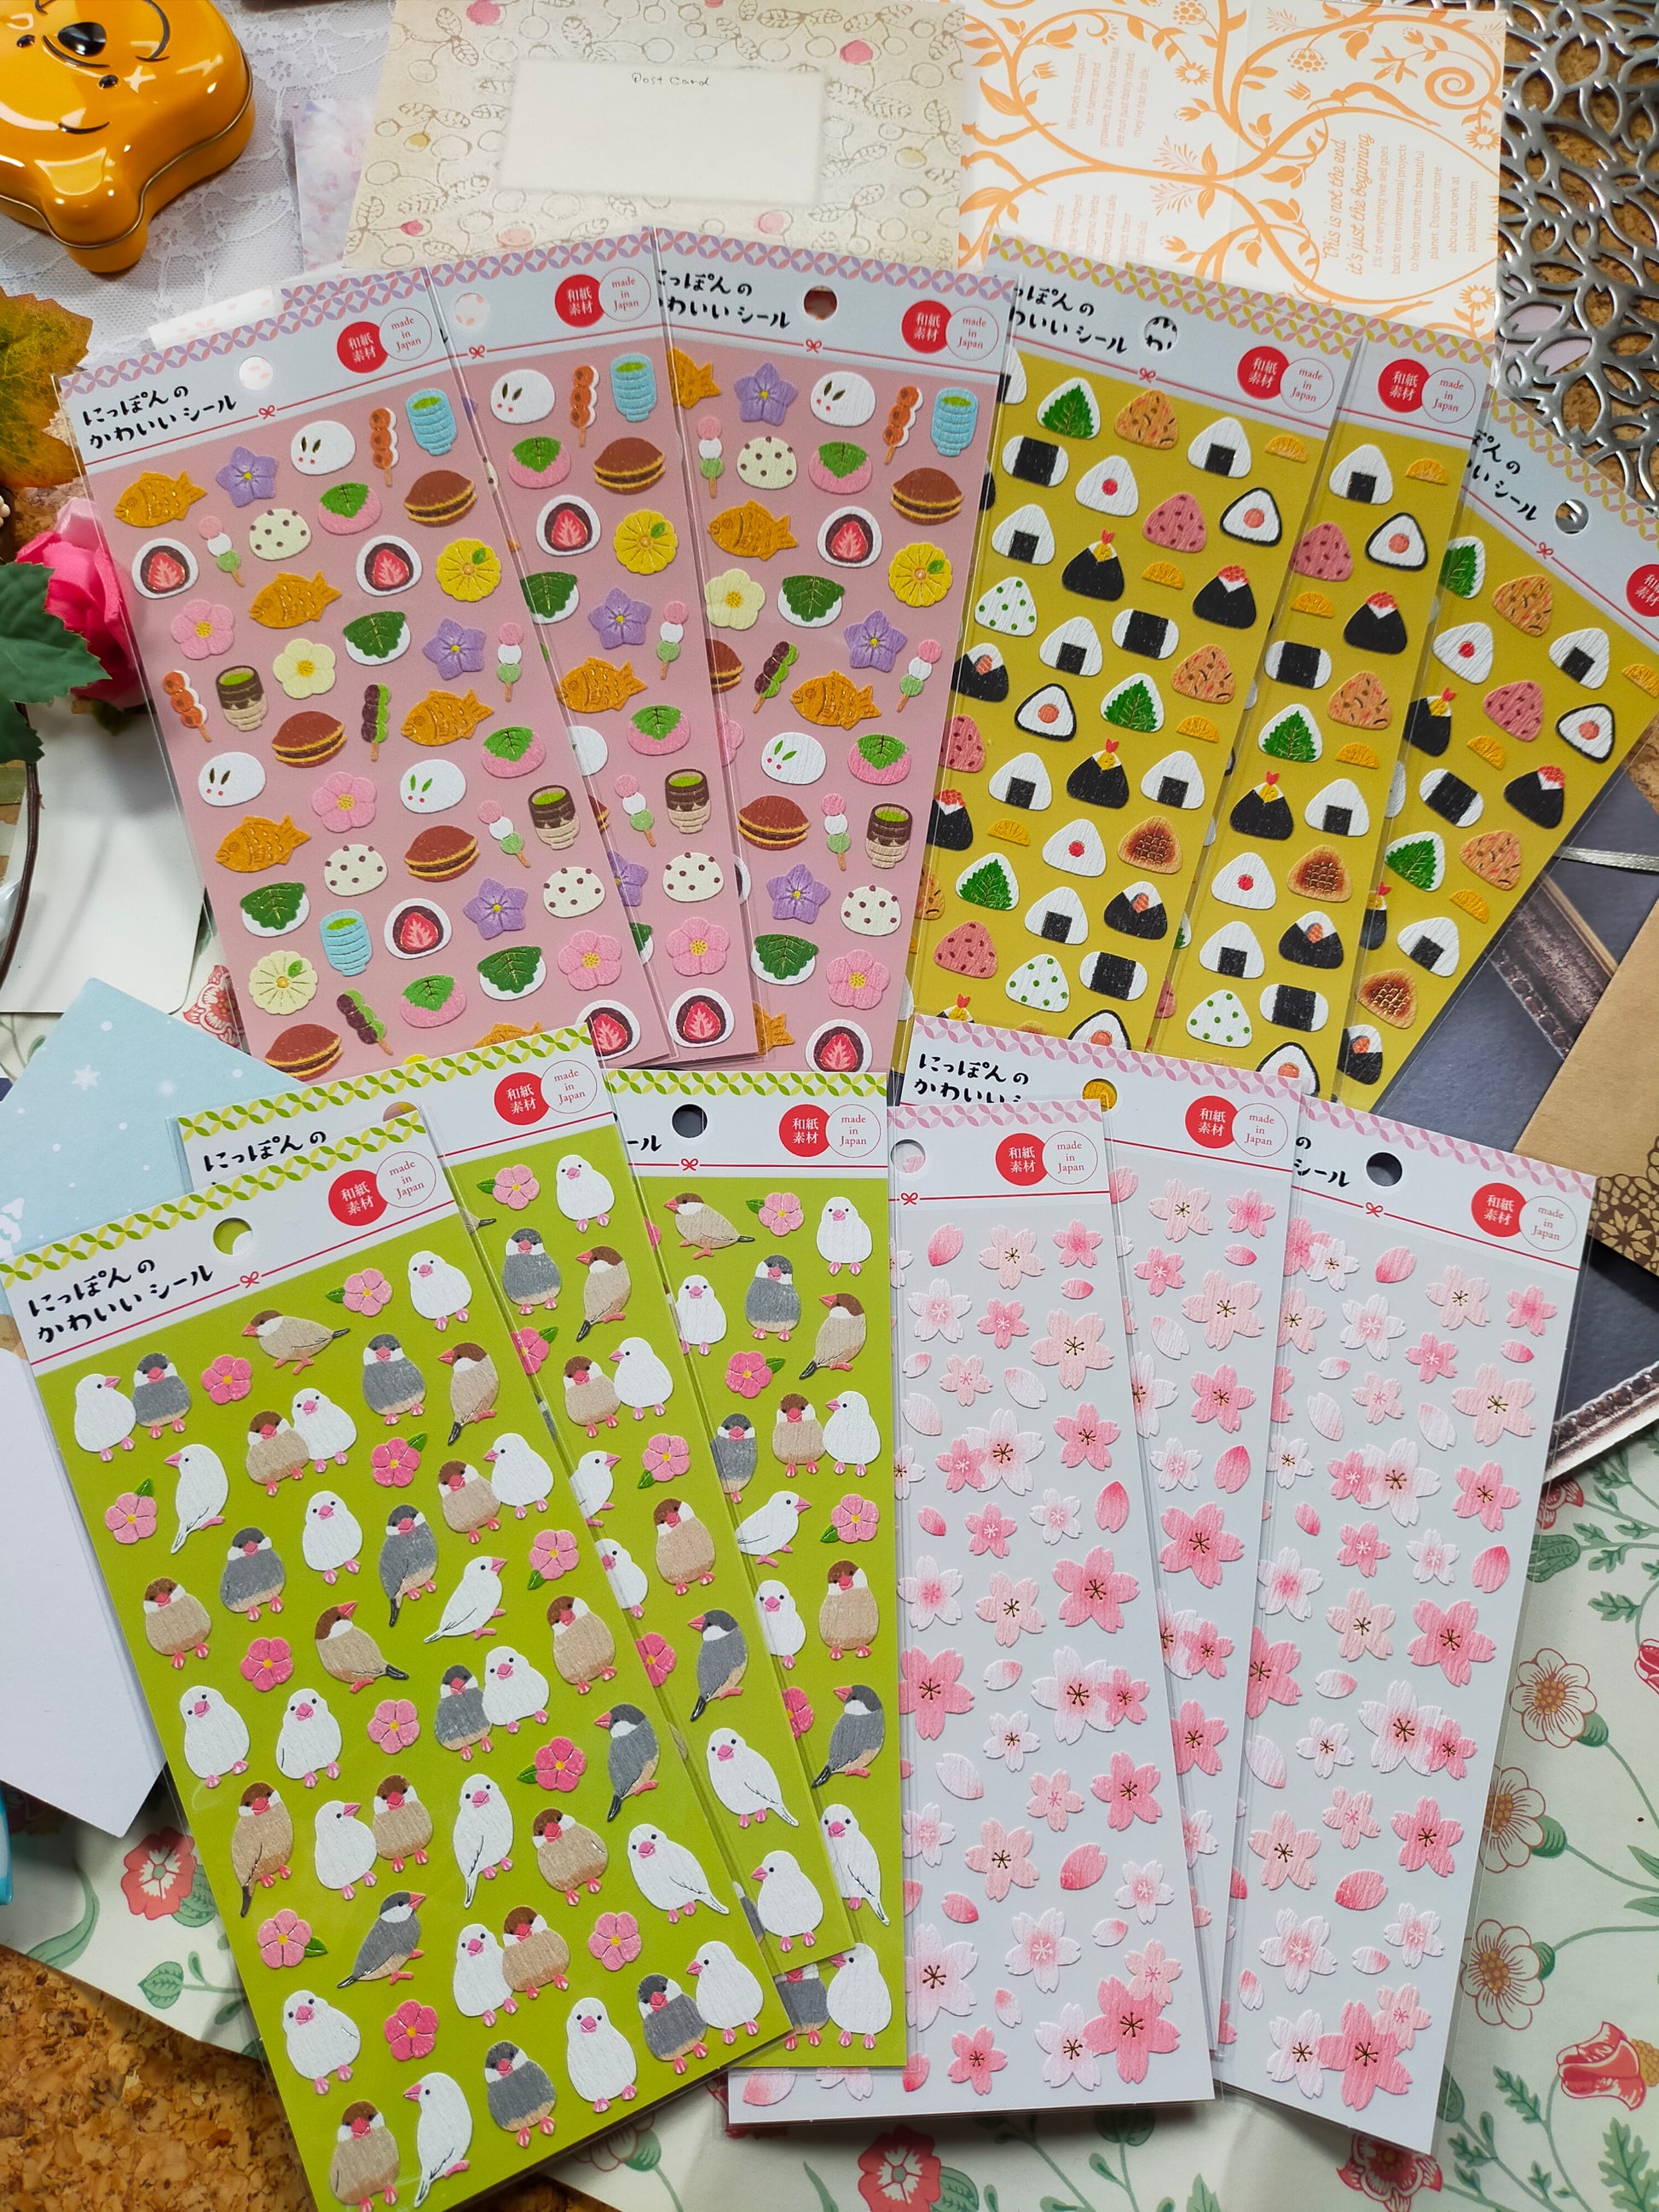 Sticker Selection Japanese Accessories,GAIA_ Pink /Green